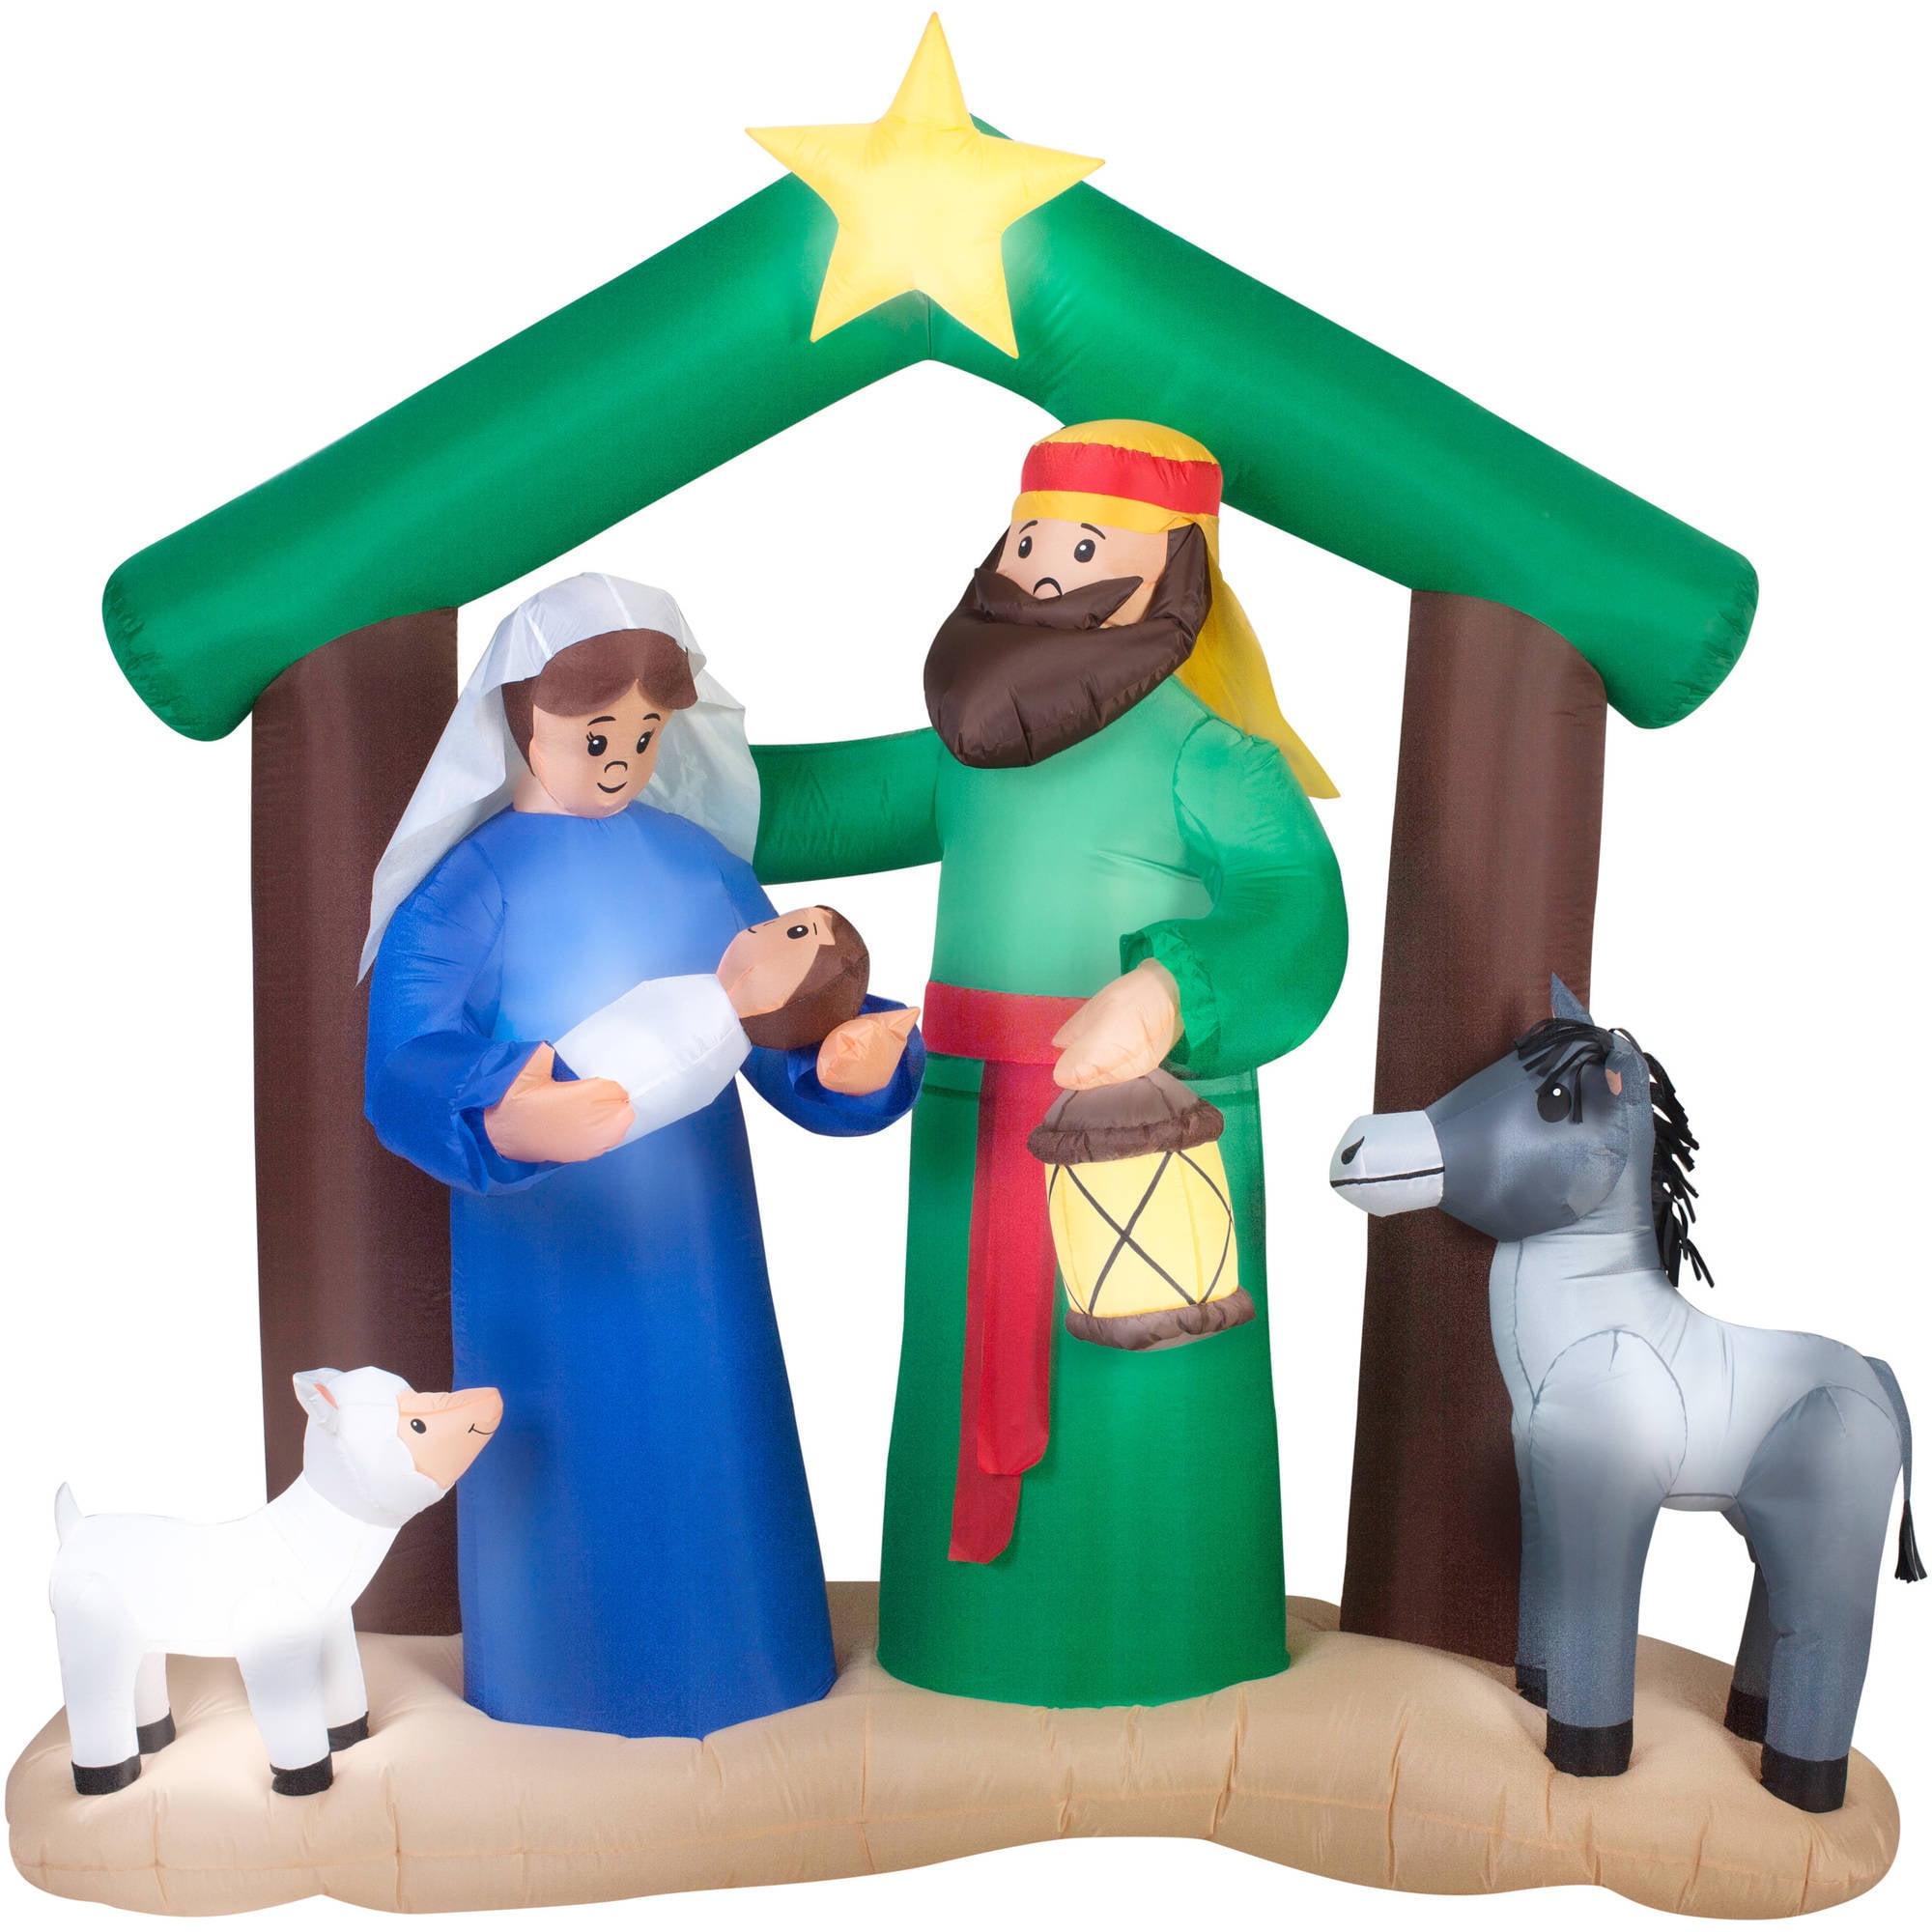 H Holy Family Nativity Scene Airblown Inflatables 7 ft W x 6 ft 